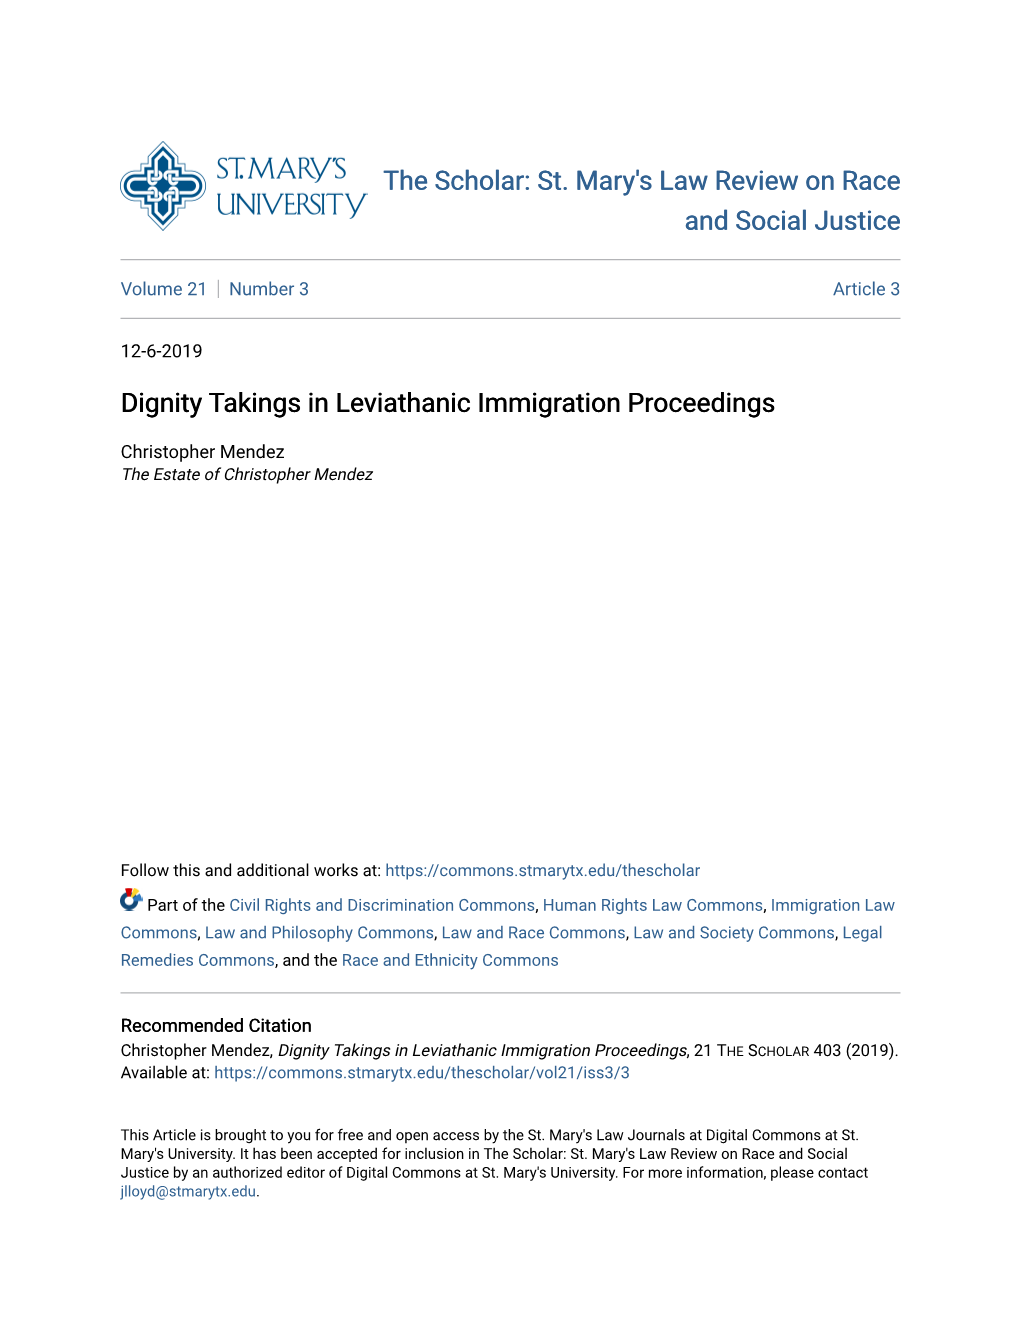 Dignity Takings in Leviathanic Immigration Proceedings